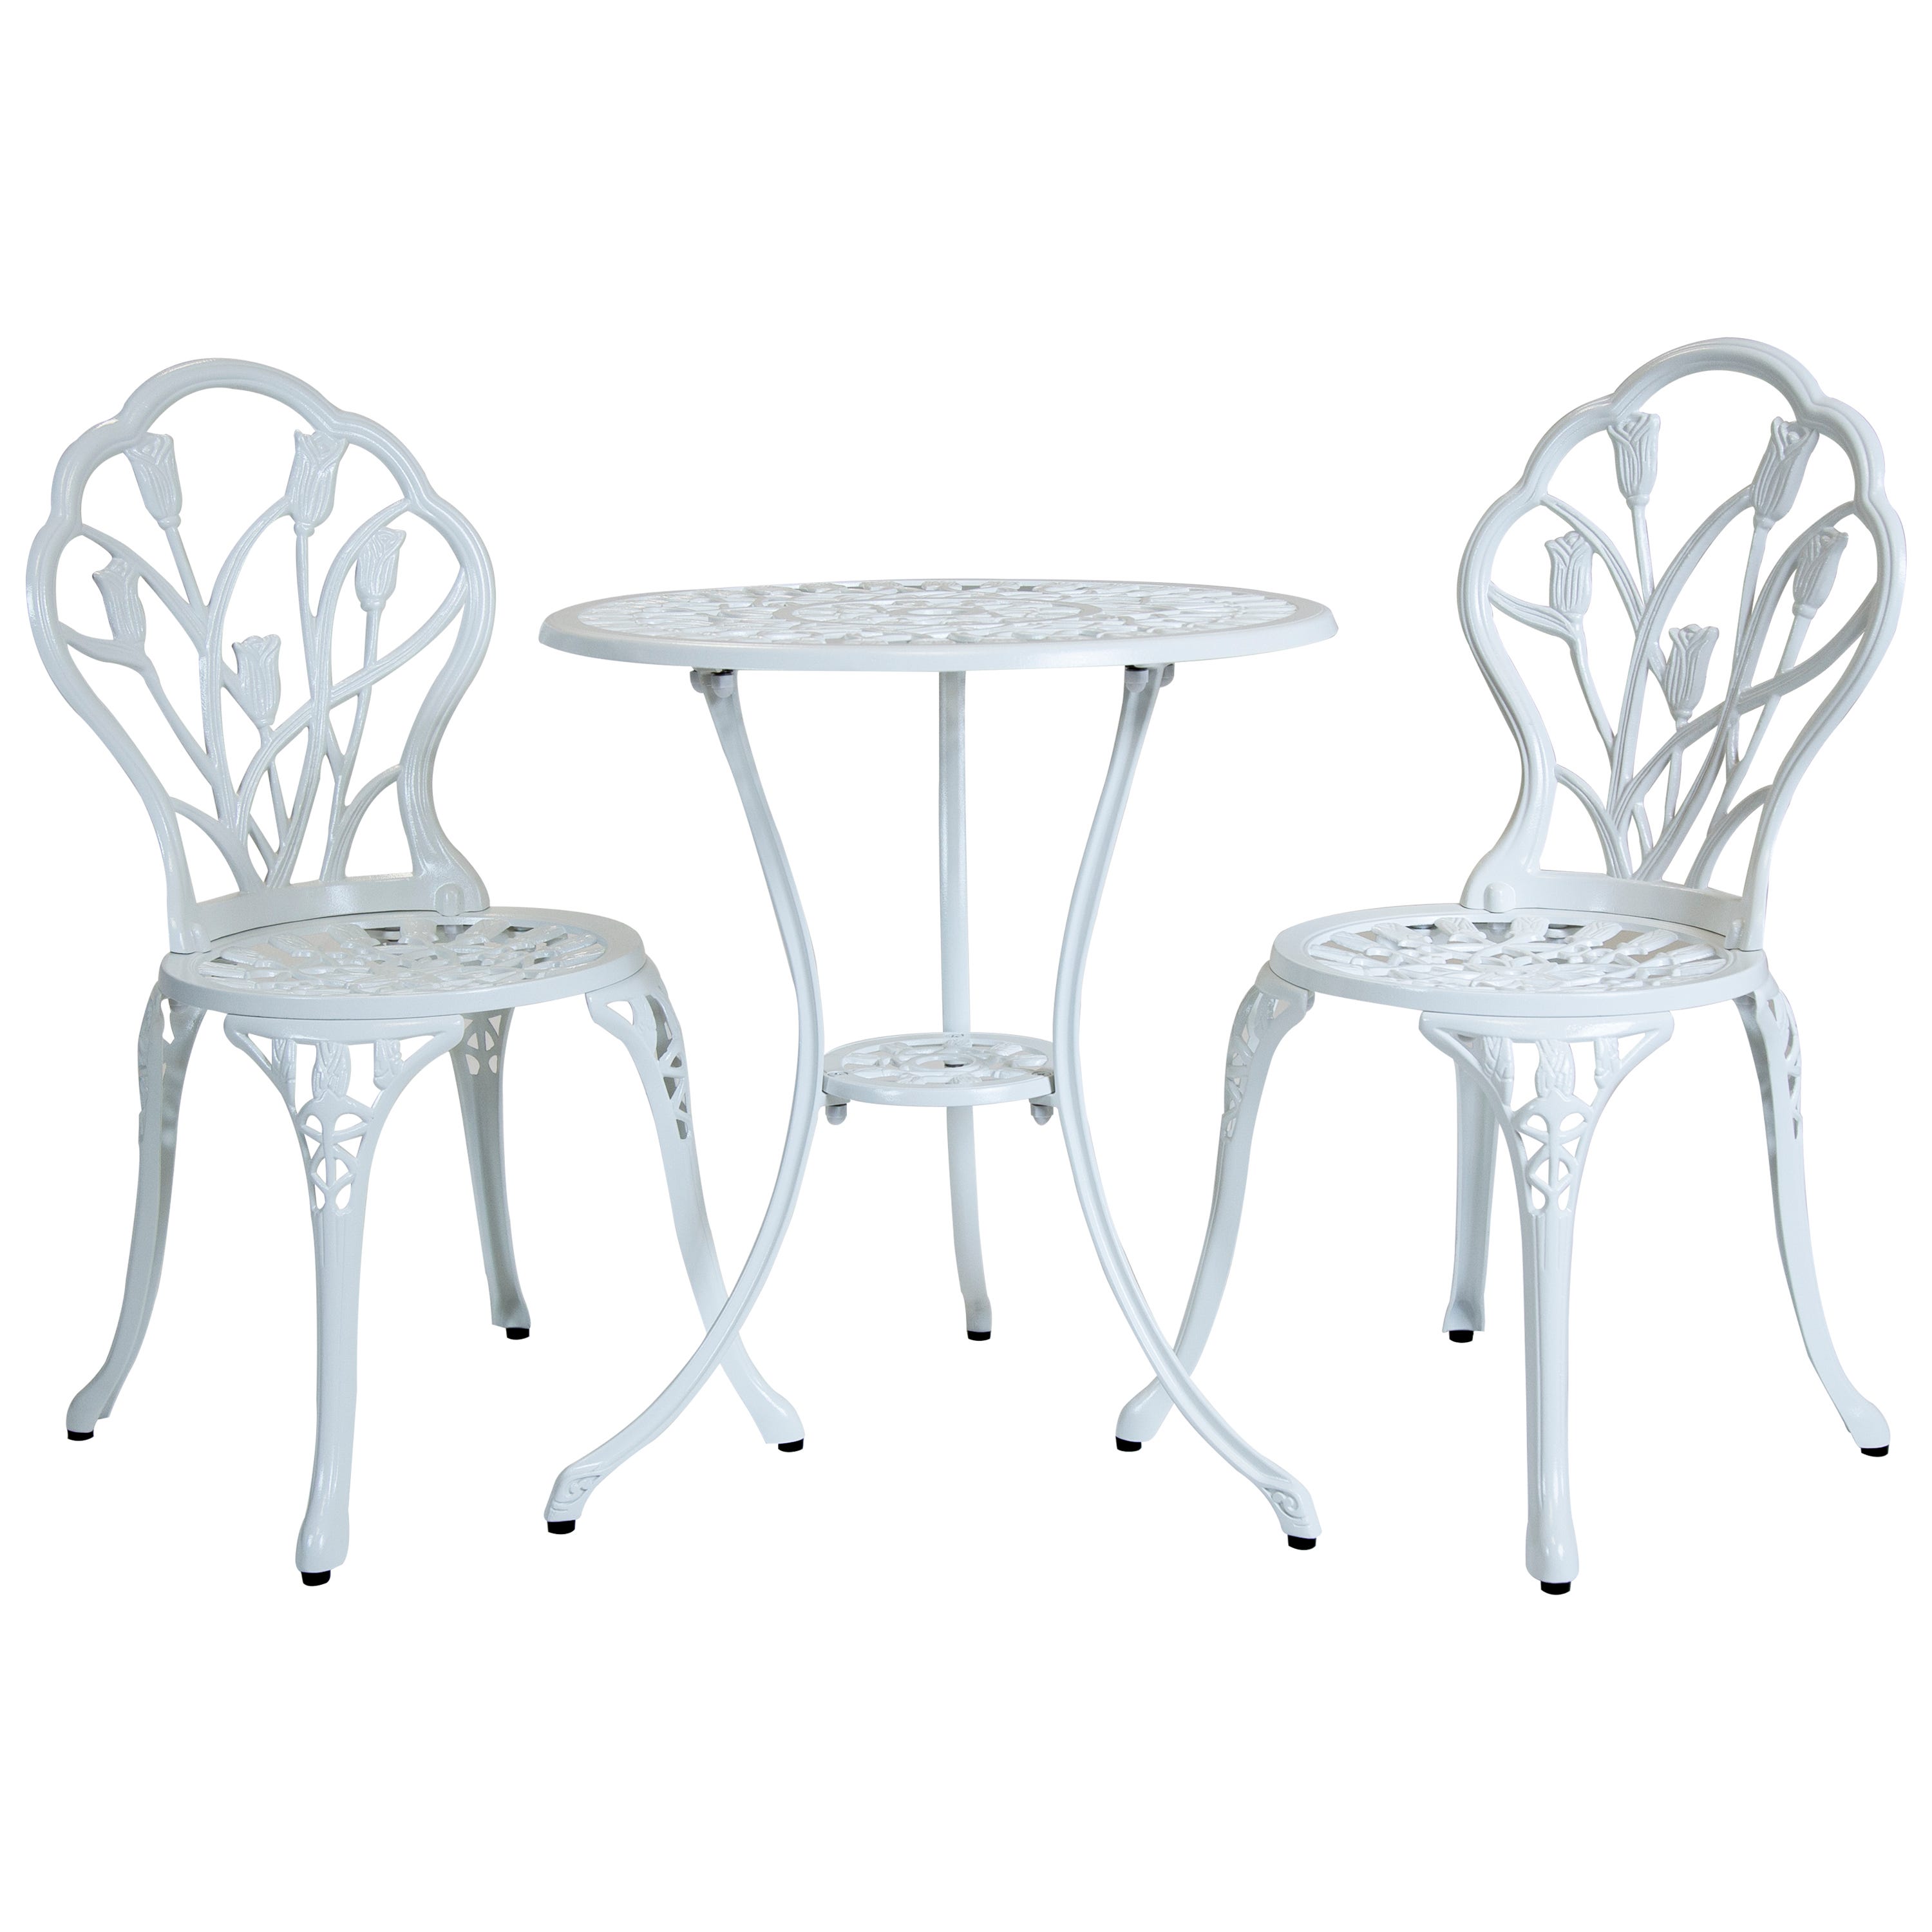 Charles Bentley Cast Aluminium Tulip Bistro Table And Chairs Set White